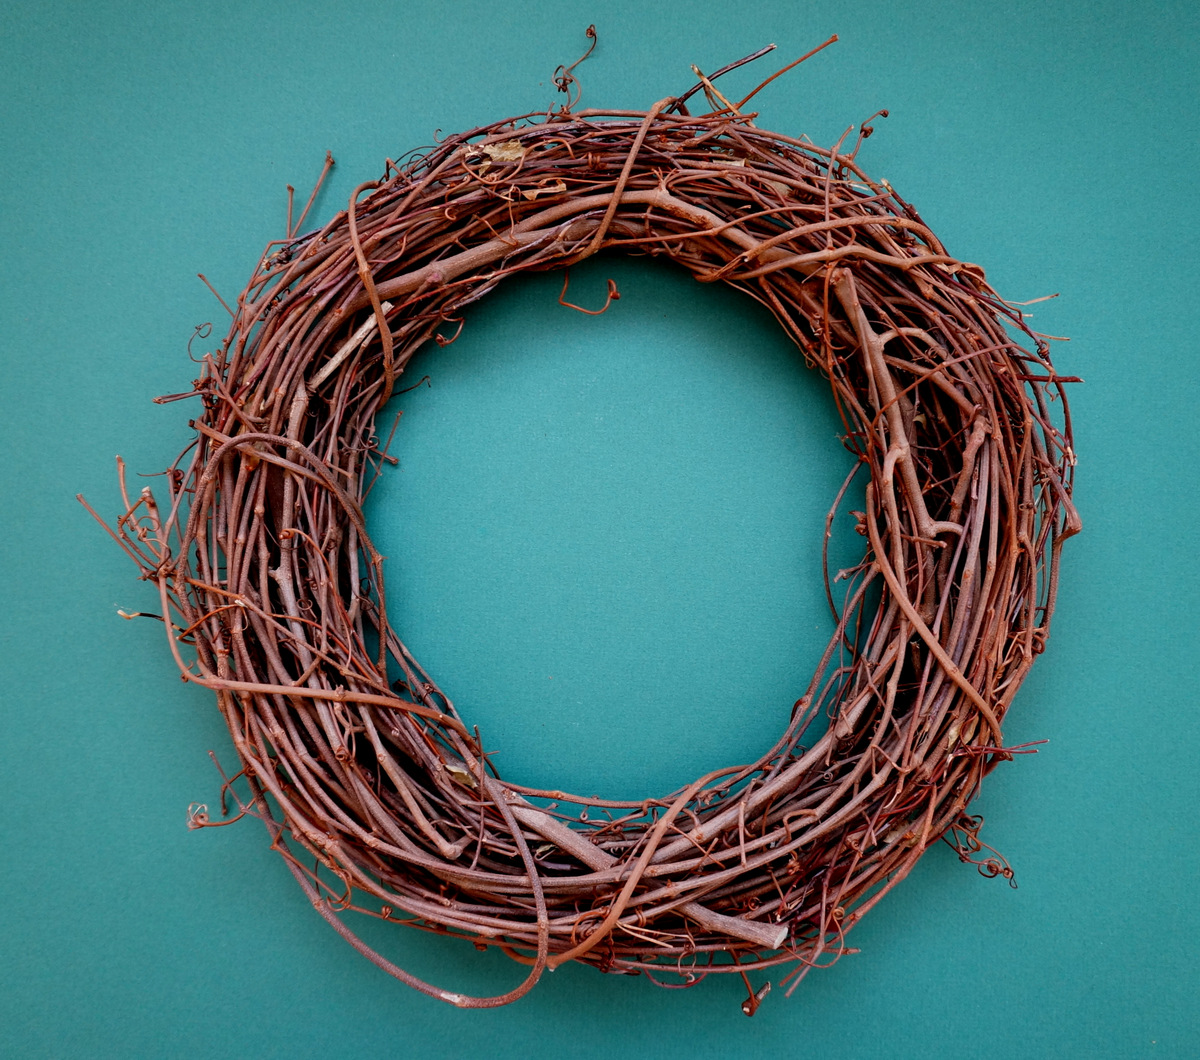 Start with a grapevine wreath